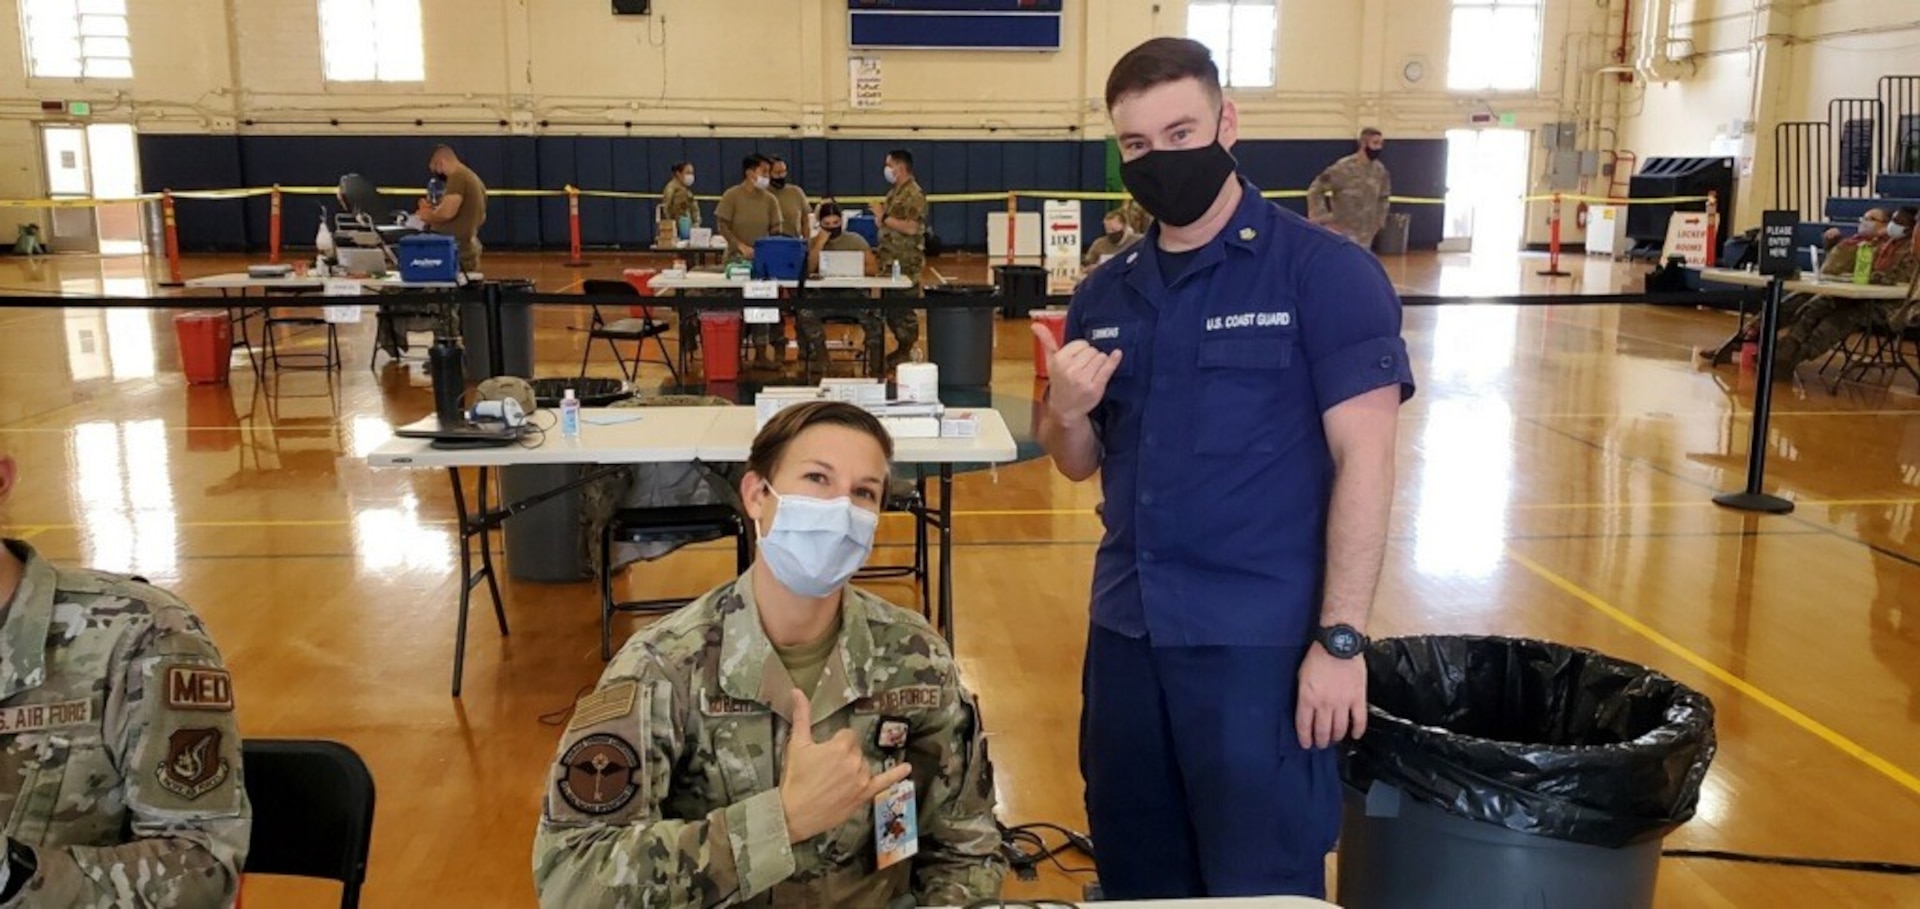 Petty Officer Second Class, Andrew Simons, a health services technician (right), assists Air Force Maj. Katherine Rorer (left) at the Tripler Army Medical Center, Hawaii, during Tripler’s MHS GENESIS “go-live” mass vaccination evolution on Sept. 28. Simons recently participated in the Coast Guard's MHS GENESIS PACWAVE “go-live” on Aug. 21 at Coast Guard Base Honolulu and was able to lend his electronic health records experience to the event.